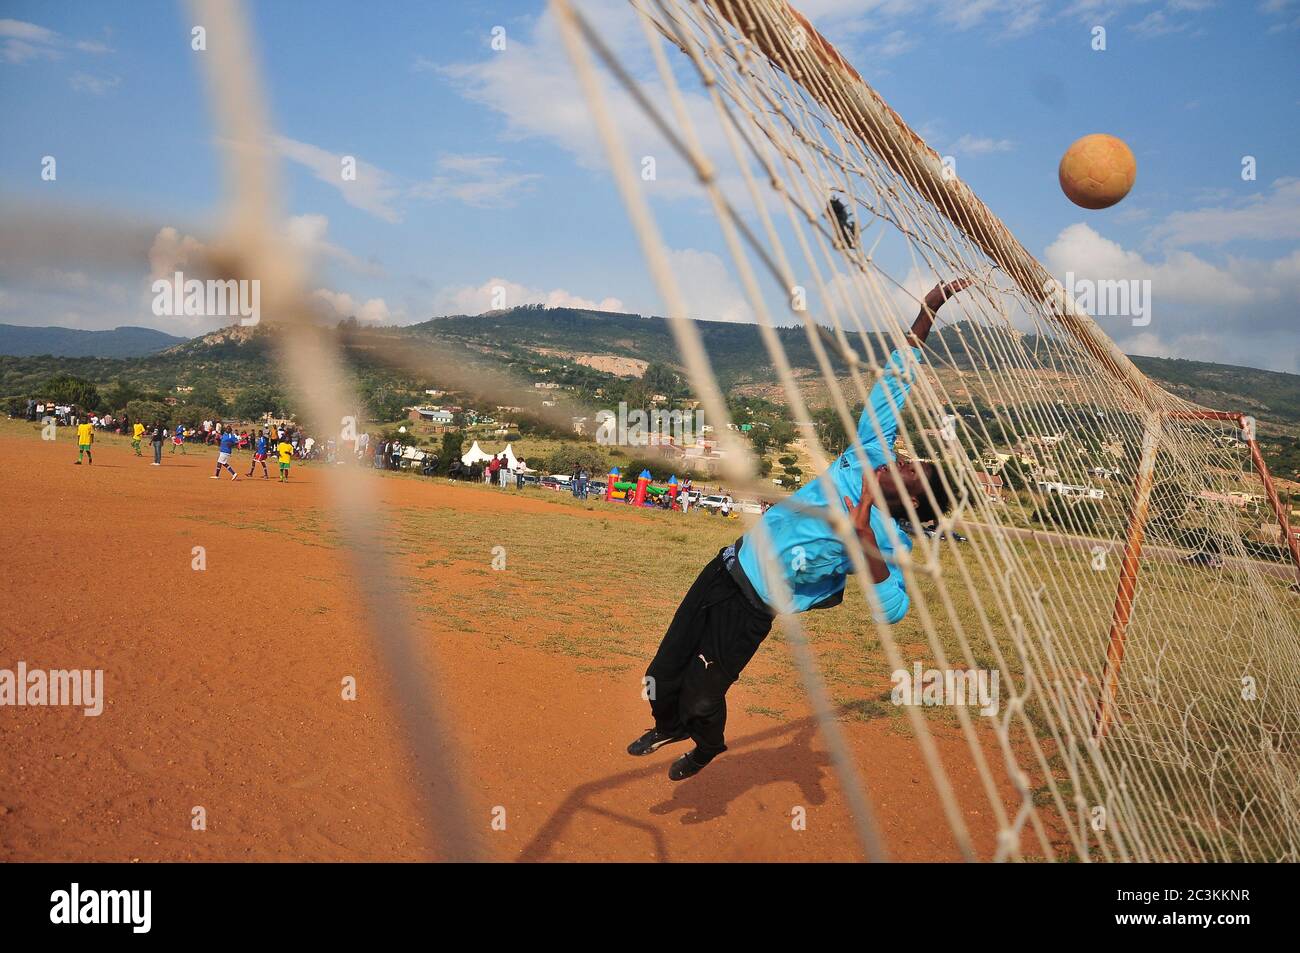 A goalkeeper makes a daring save during a football match in Limpopo, South Africa Stock Photo